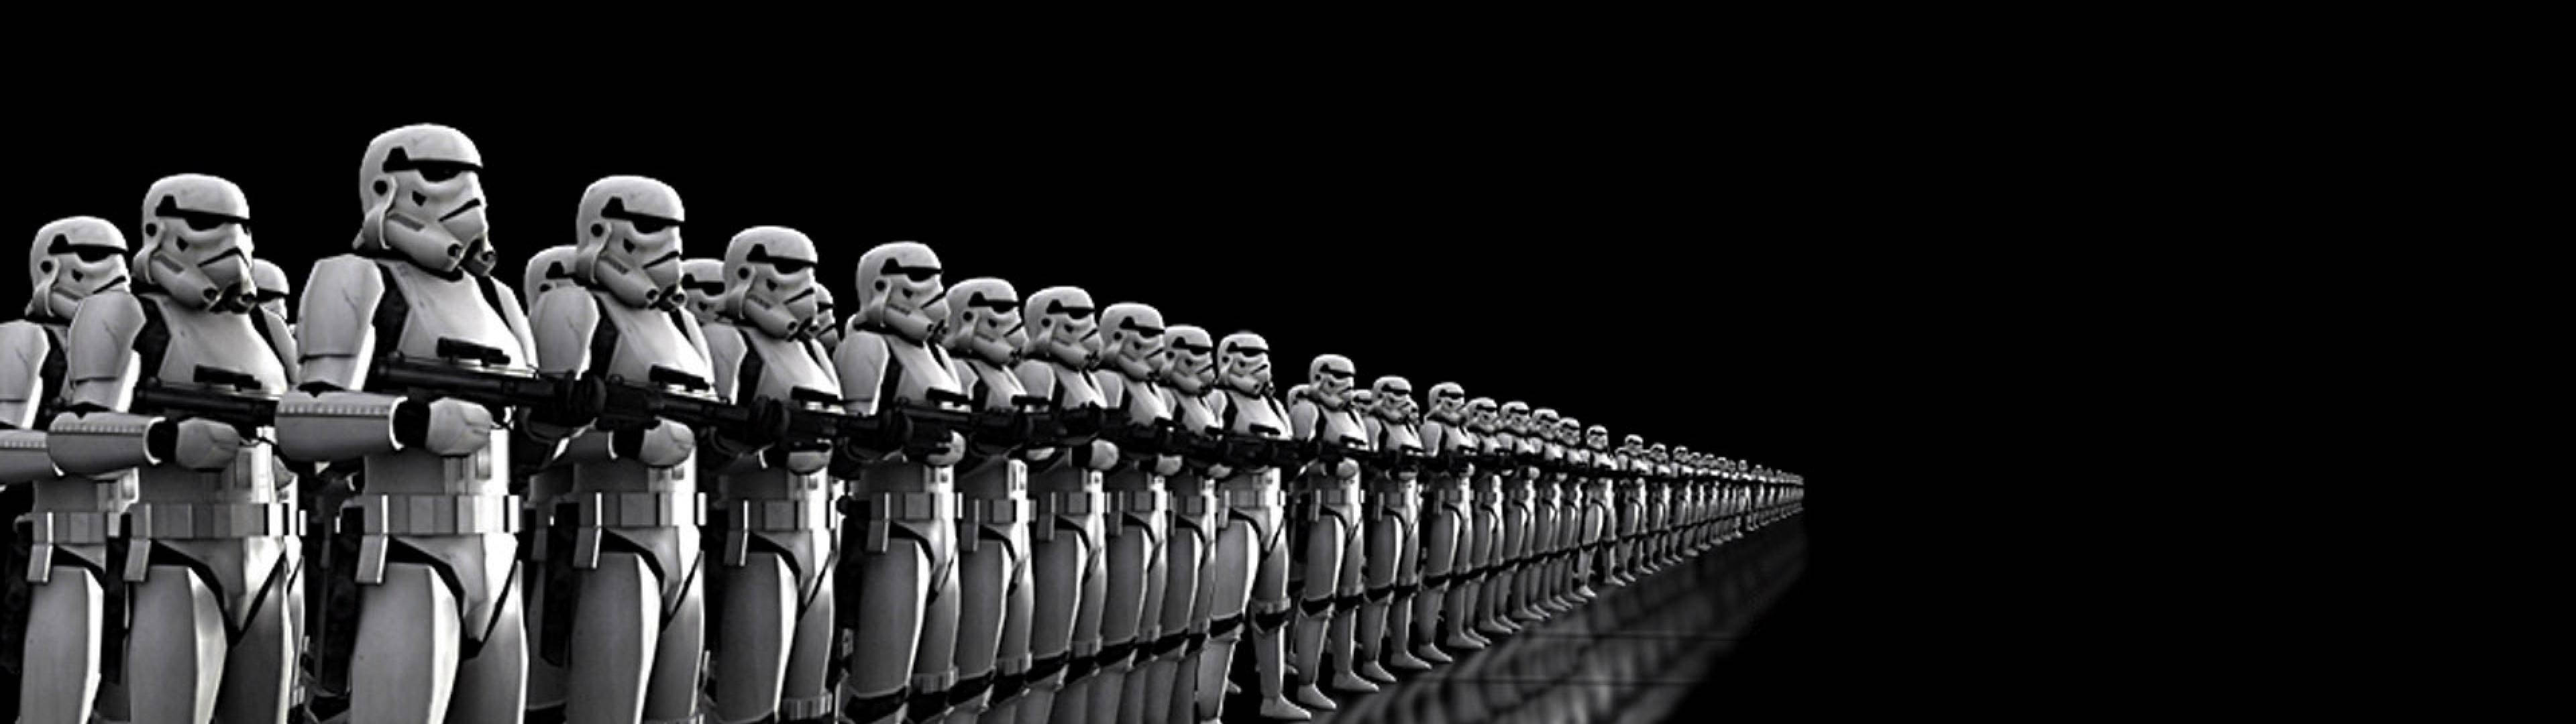 Star Wars Dual Screen Stormtroopers Background